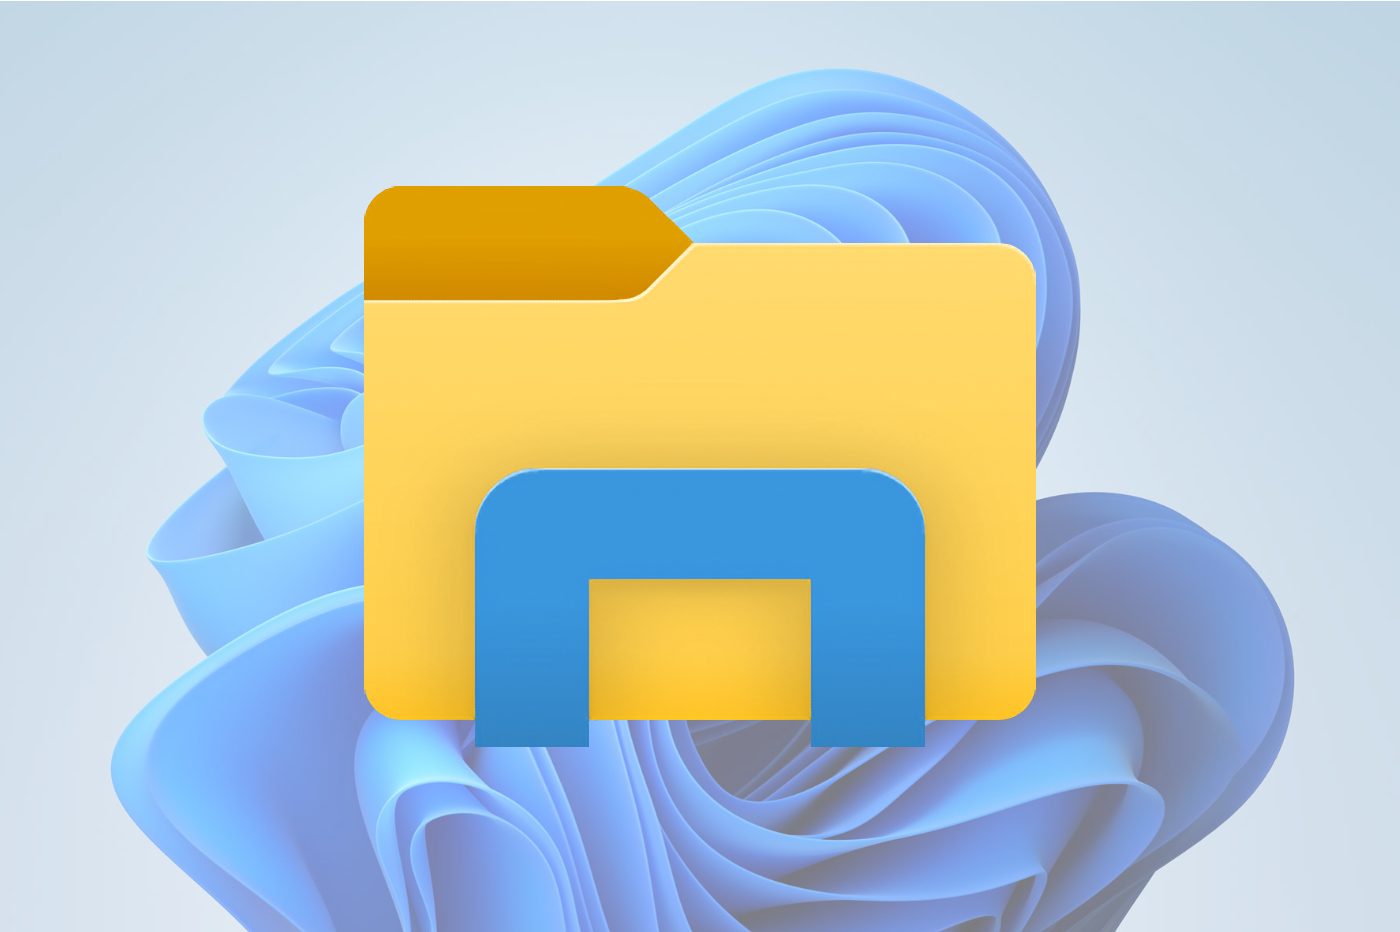 10 hidden tips and features to master File Explorer